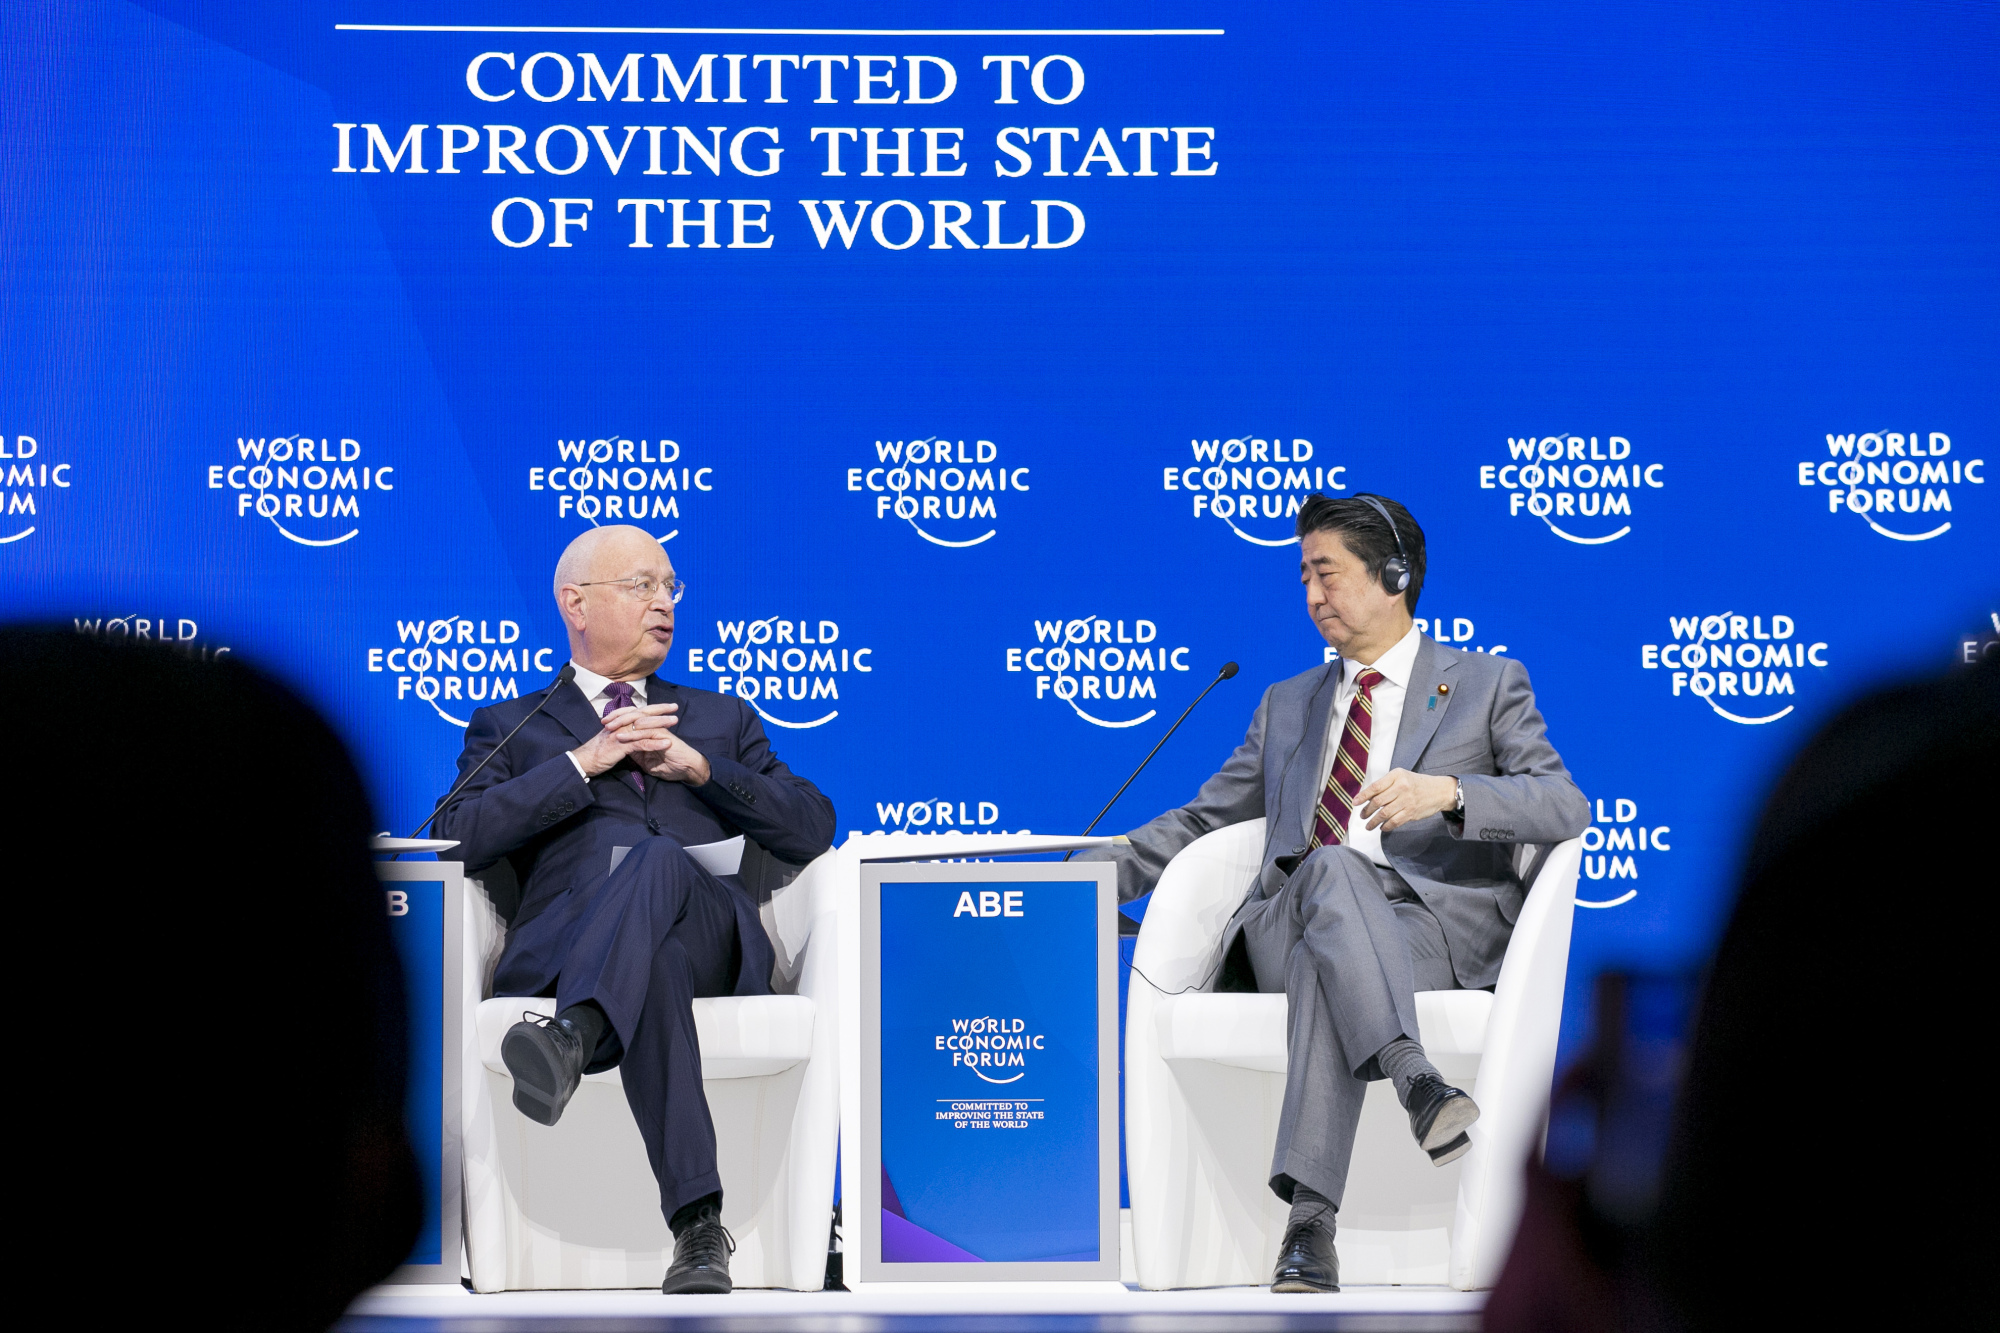 Klaus Schwab, founder and executive chairman of the World Economic Forum (WEF), speaks with Prime Minister Shinzo Abe during a session at the 2019 WEF Annual Meeting on Jan. 23, 2019.  WORLD ECONOMIC FORUM | THE JAPAN TIMES / GETTY IMAGES